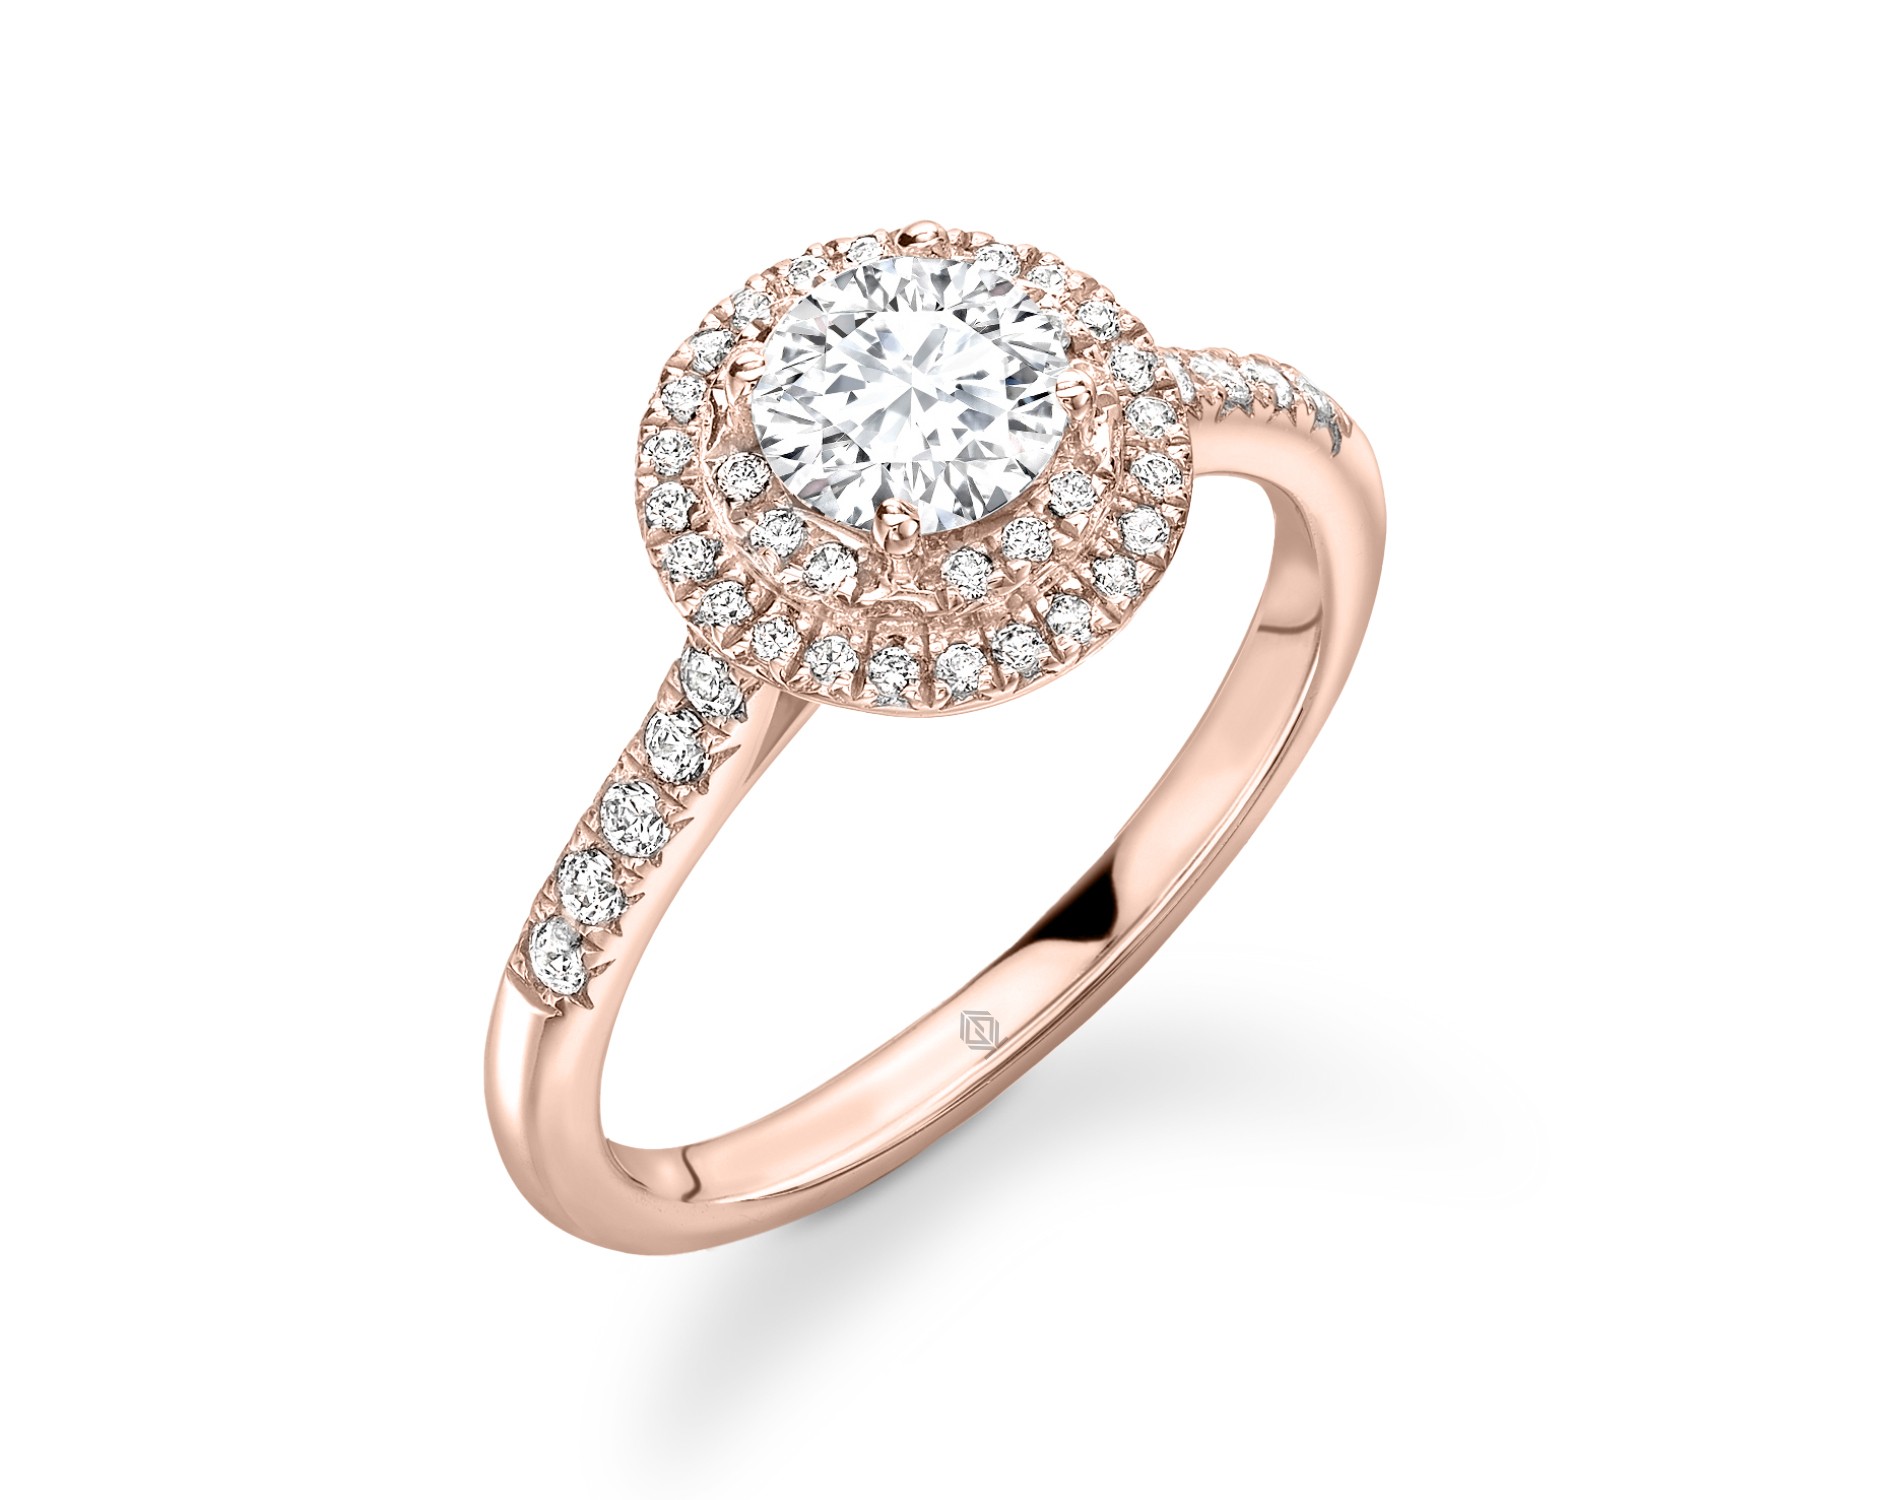 18K ROSE GOLD DOUBLE HALO ROUND CUT DIAMOND ENGAGEMENT RING WITH SIDE STONES PAVE SET